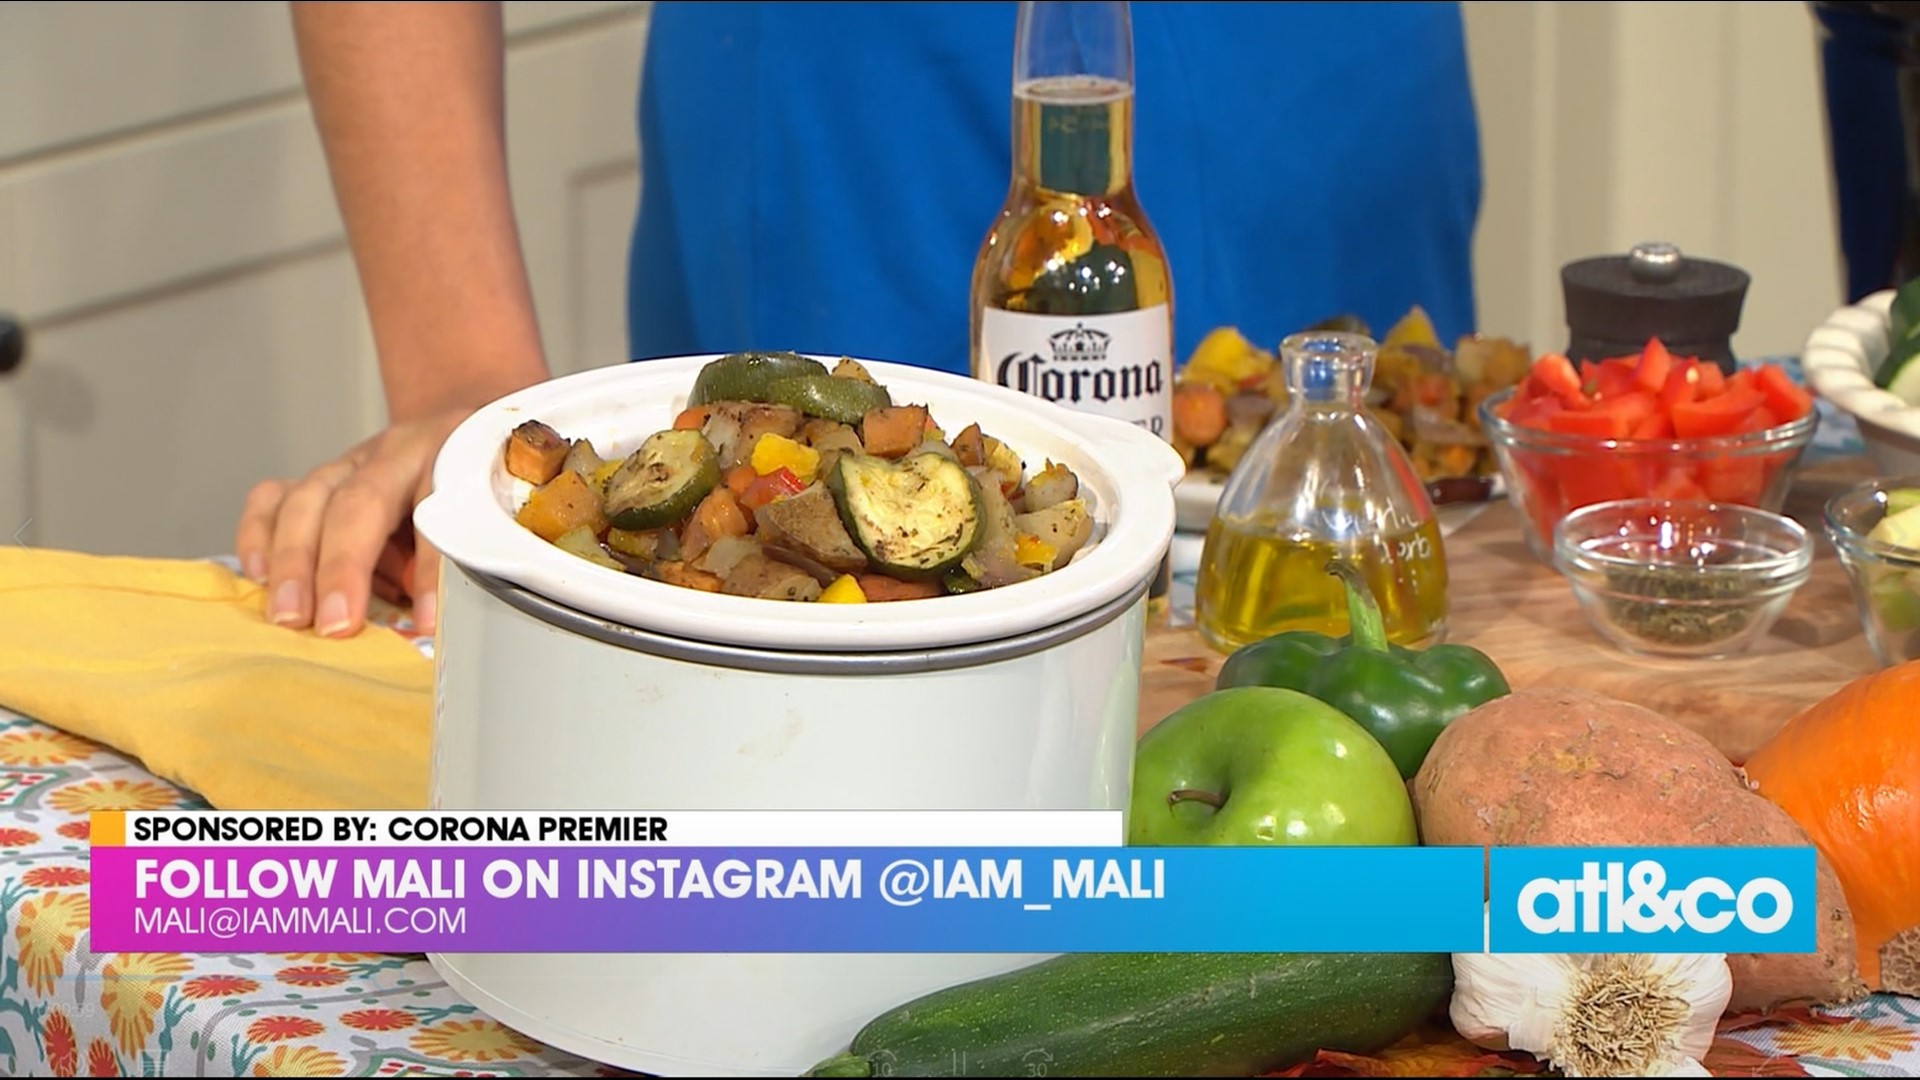 Happy Soup Season with Chef Mali Wilson! Simmer up this savory slow-cooked Corona Premier Roasted Vegetable Stew.